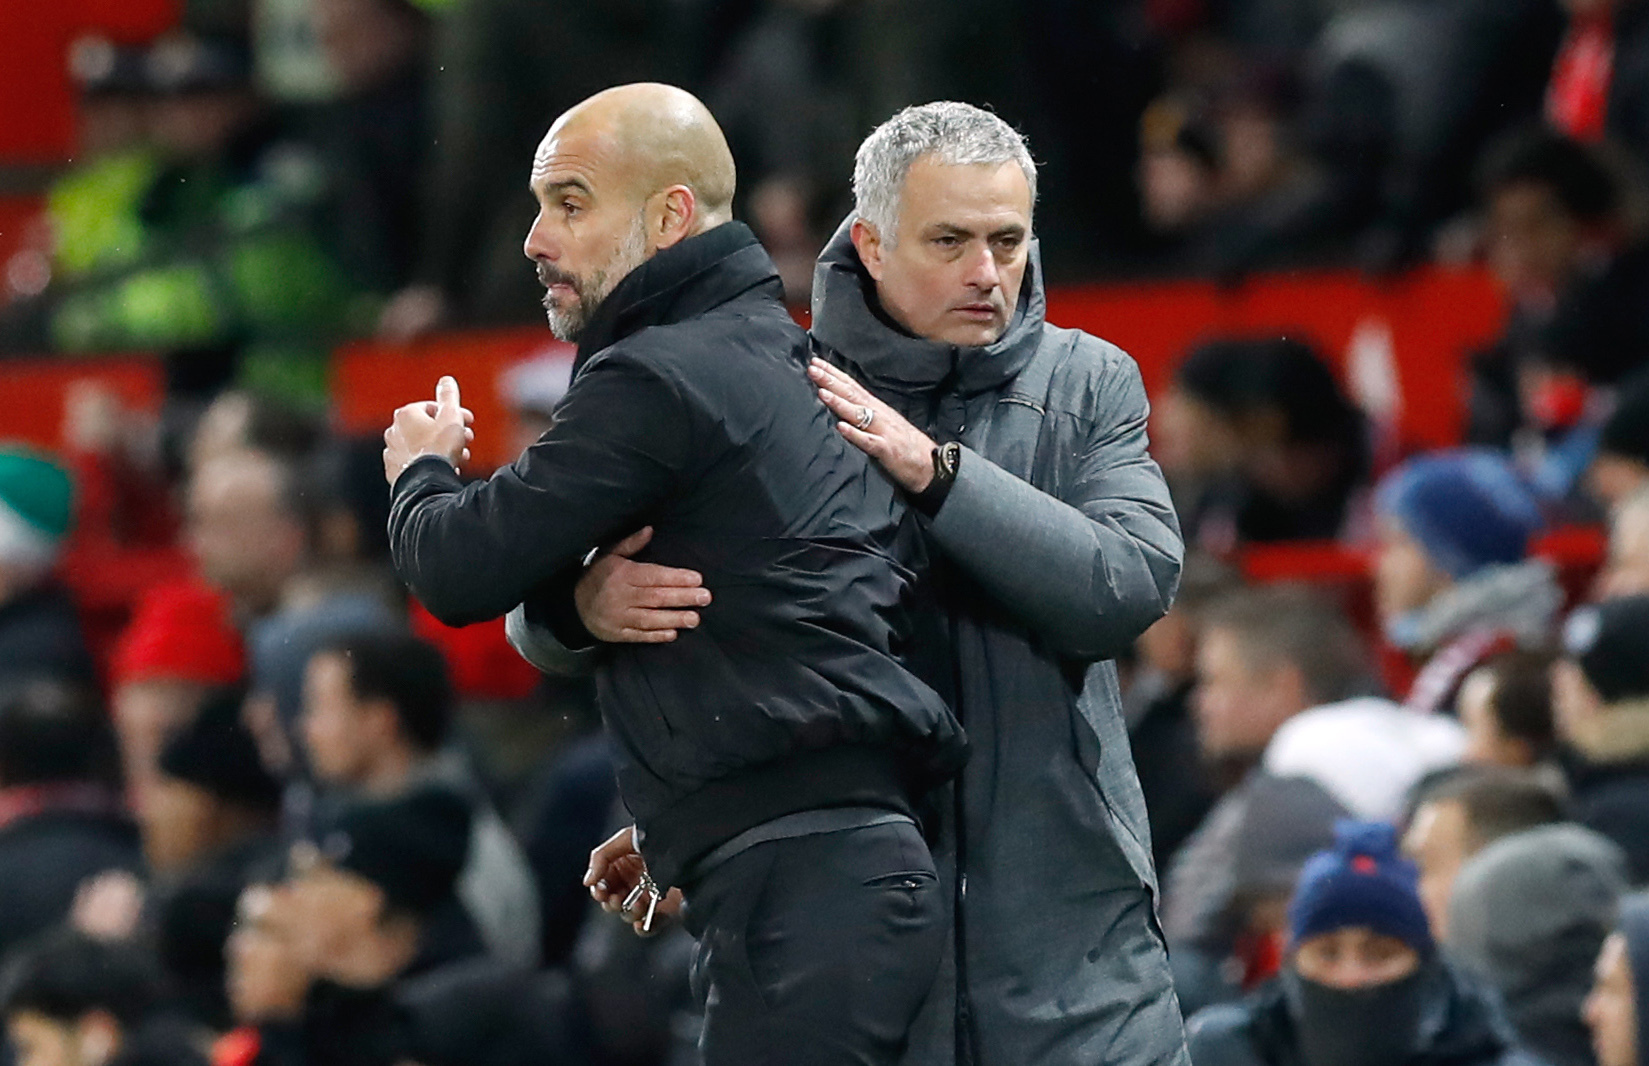 Manchester City manager Pep Guardiola (left) and Manchester United manager Jose Mourinho after the final whistle of the Premier League match at Old Trafford, Manchester. (PA Wire)